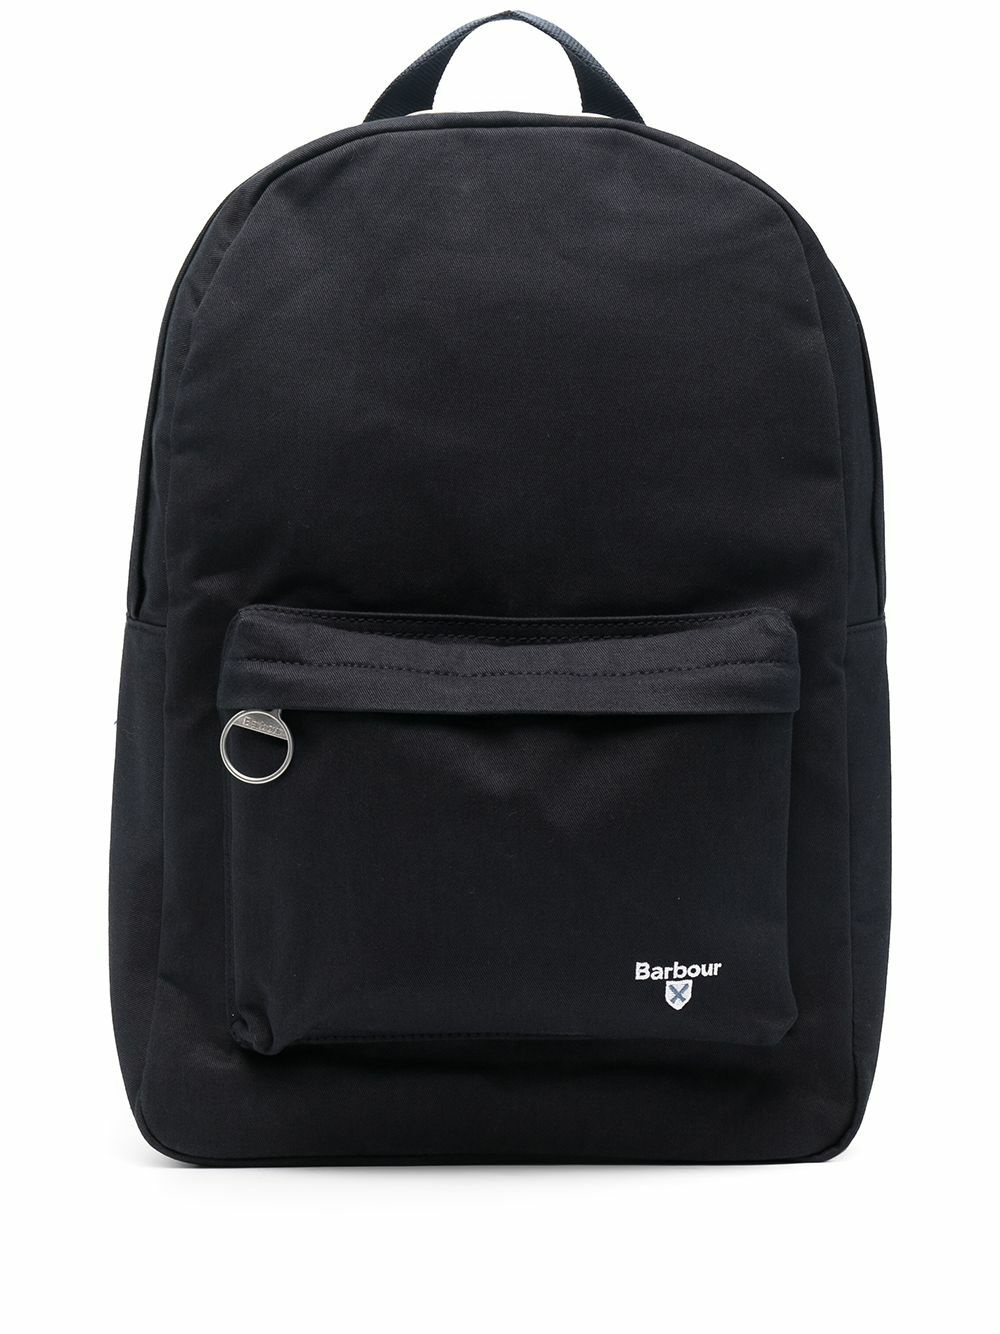 BARBOUR - Backpack With Logo Barbour